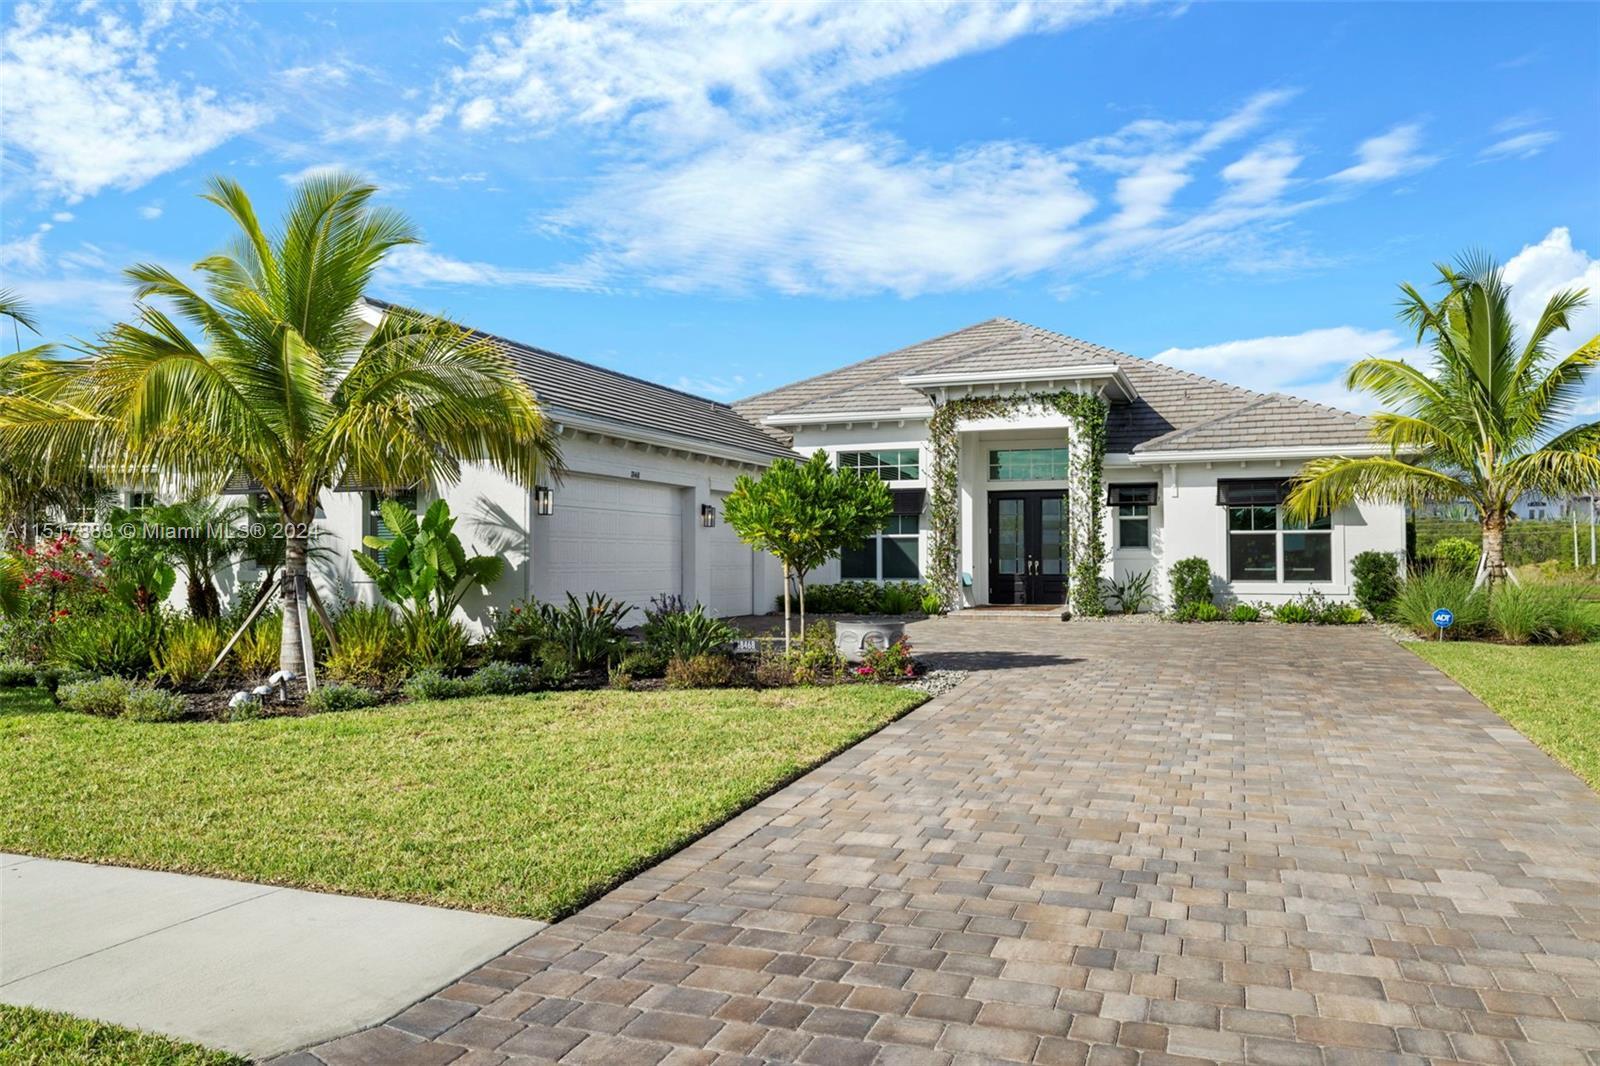 Photo of 18468 Wildblue Blvd in Fort Myers, FL